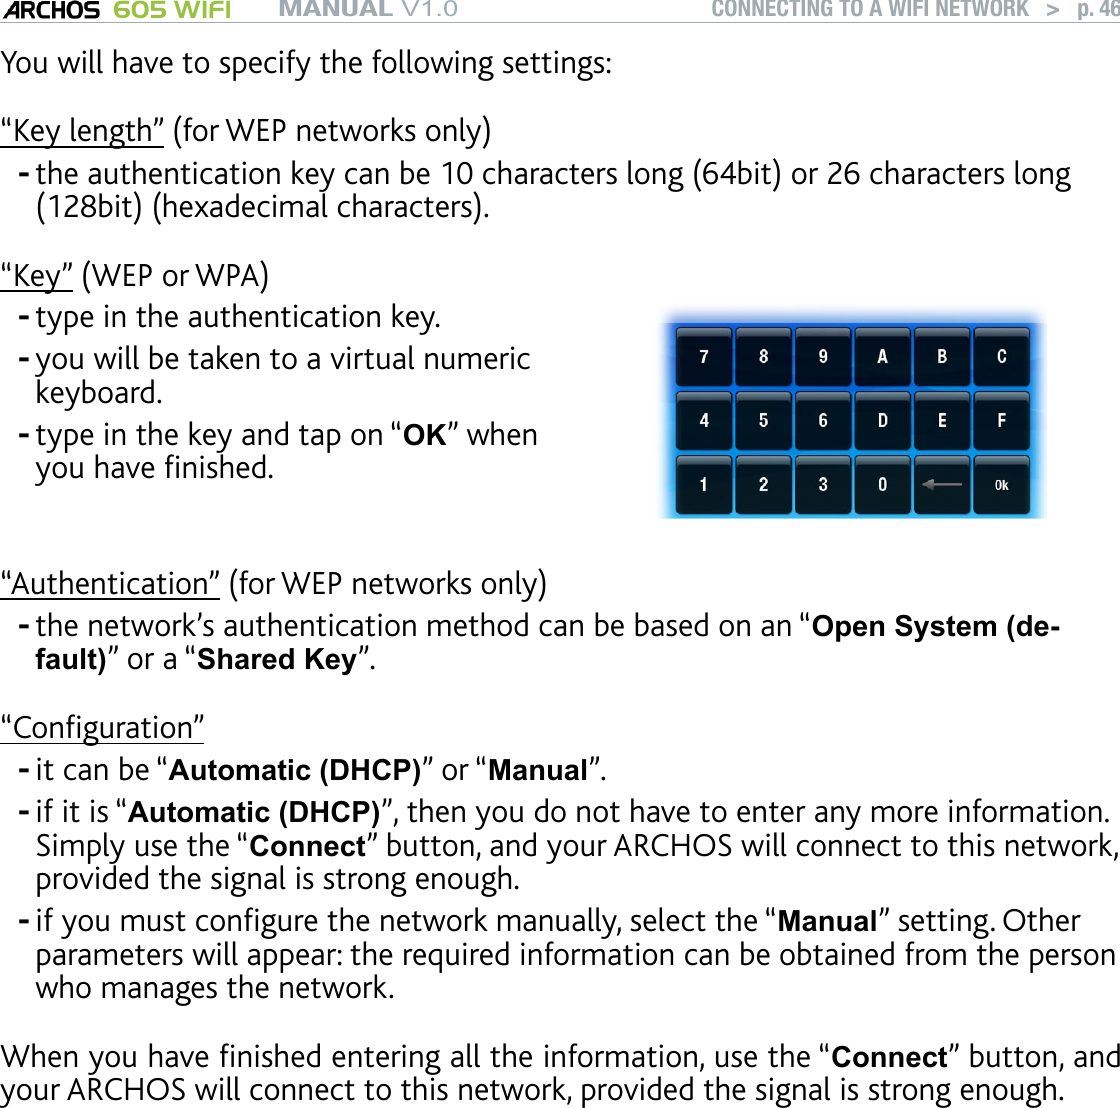 MANUAL V1.0 605 WIFI CONNECTING TO A WIFI NETWORK   &gt;   p. 46You will have to specify the following settings:“Key length” (for WEP networks only)the authentication key can be 10 characters long (64bit) or 26 characters long (128bit) (hexadecimal characters).“Key” (WEP or WPA)type in the authentication key. you will be taken to a virtual numeric keyboard.type in the key and tap on “OK” when you have nished.---“Authentication” (for WEP networks only)the network’s authentication method can be based on an “Open System (de-fault)” or a “Shared Key”.“Conguration”it can be “Automatic (DHCP)” or “Manual”.if it is “Automatic (DHCP)”, then you do not have to enter any more information. Simply use the “Connect” button, and your ARCHOS will connect to this network, provided the signal is strong enough.if you must congure the network manually, select the “Manual” setting. Other parameters will appear: the required information can be obtained from the person who manages the network.When you have nished entering all the information, use the “Connect” button, and your ARCHOS will connect to this network, provided the signal is strong enough.Filtered networks: If your network manager allows only specic devices to connect to the network (known as MAC address ltering), you can supply the network man-ager with the MAC address of your ARCHOS. To nd out what your MAC address is, select the “System” menu item from the Home screen, then choose “System”. See: System Settings.-----